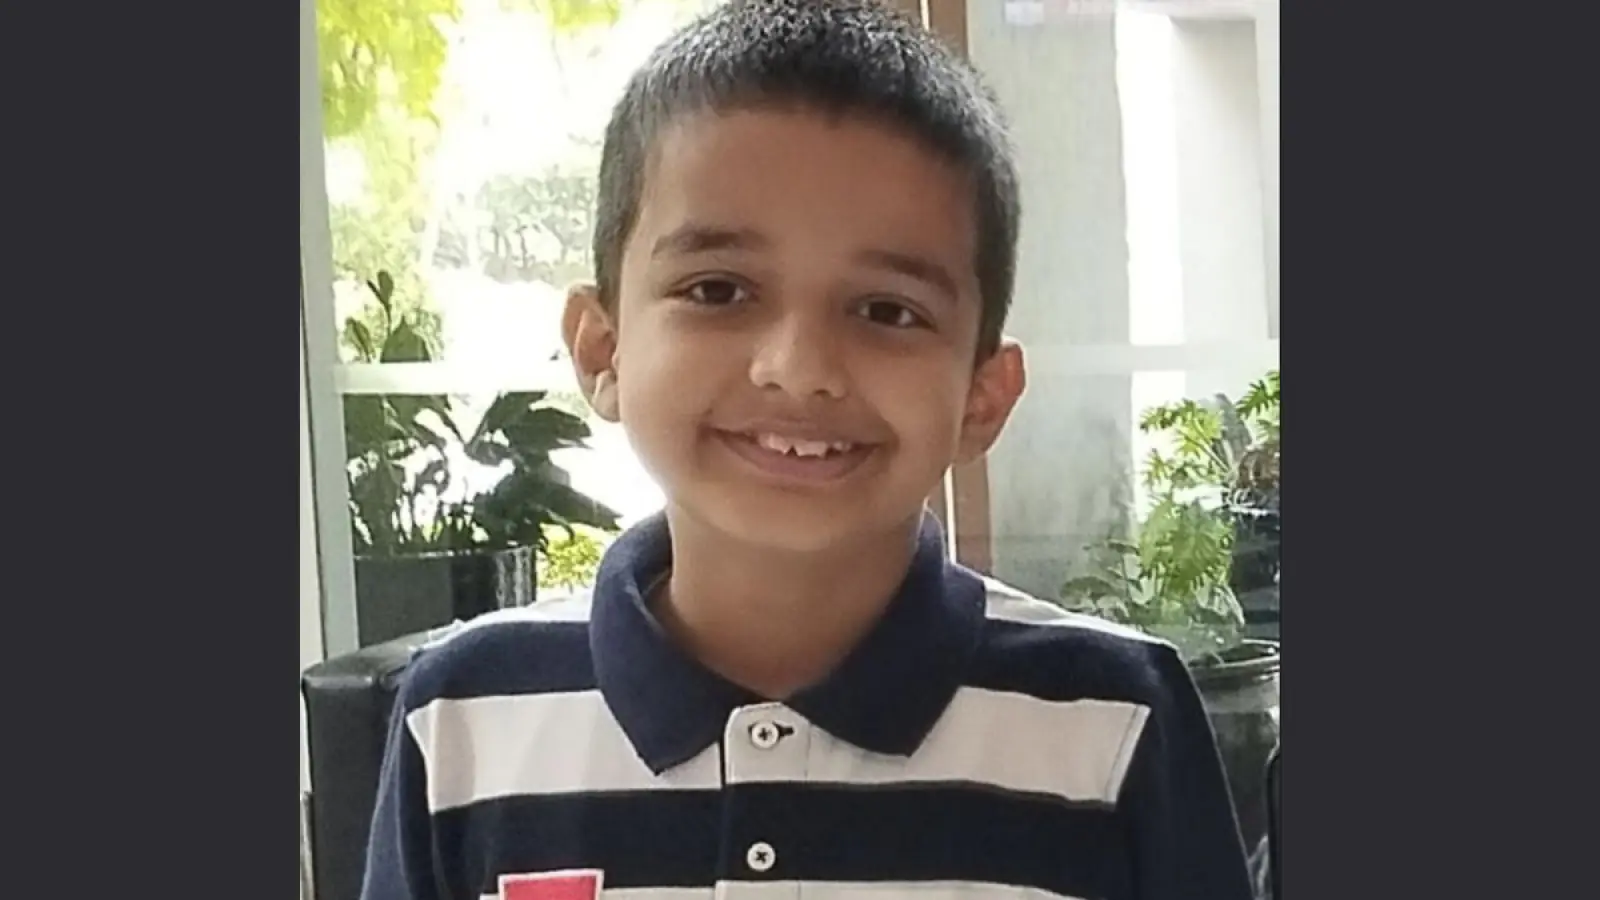 Indian Arsheit Dwivedi, 10, a child prodigy with an IQ of 142, among world’s brightest students: Johns Hopkins